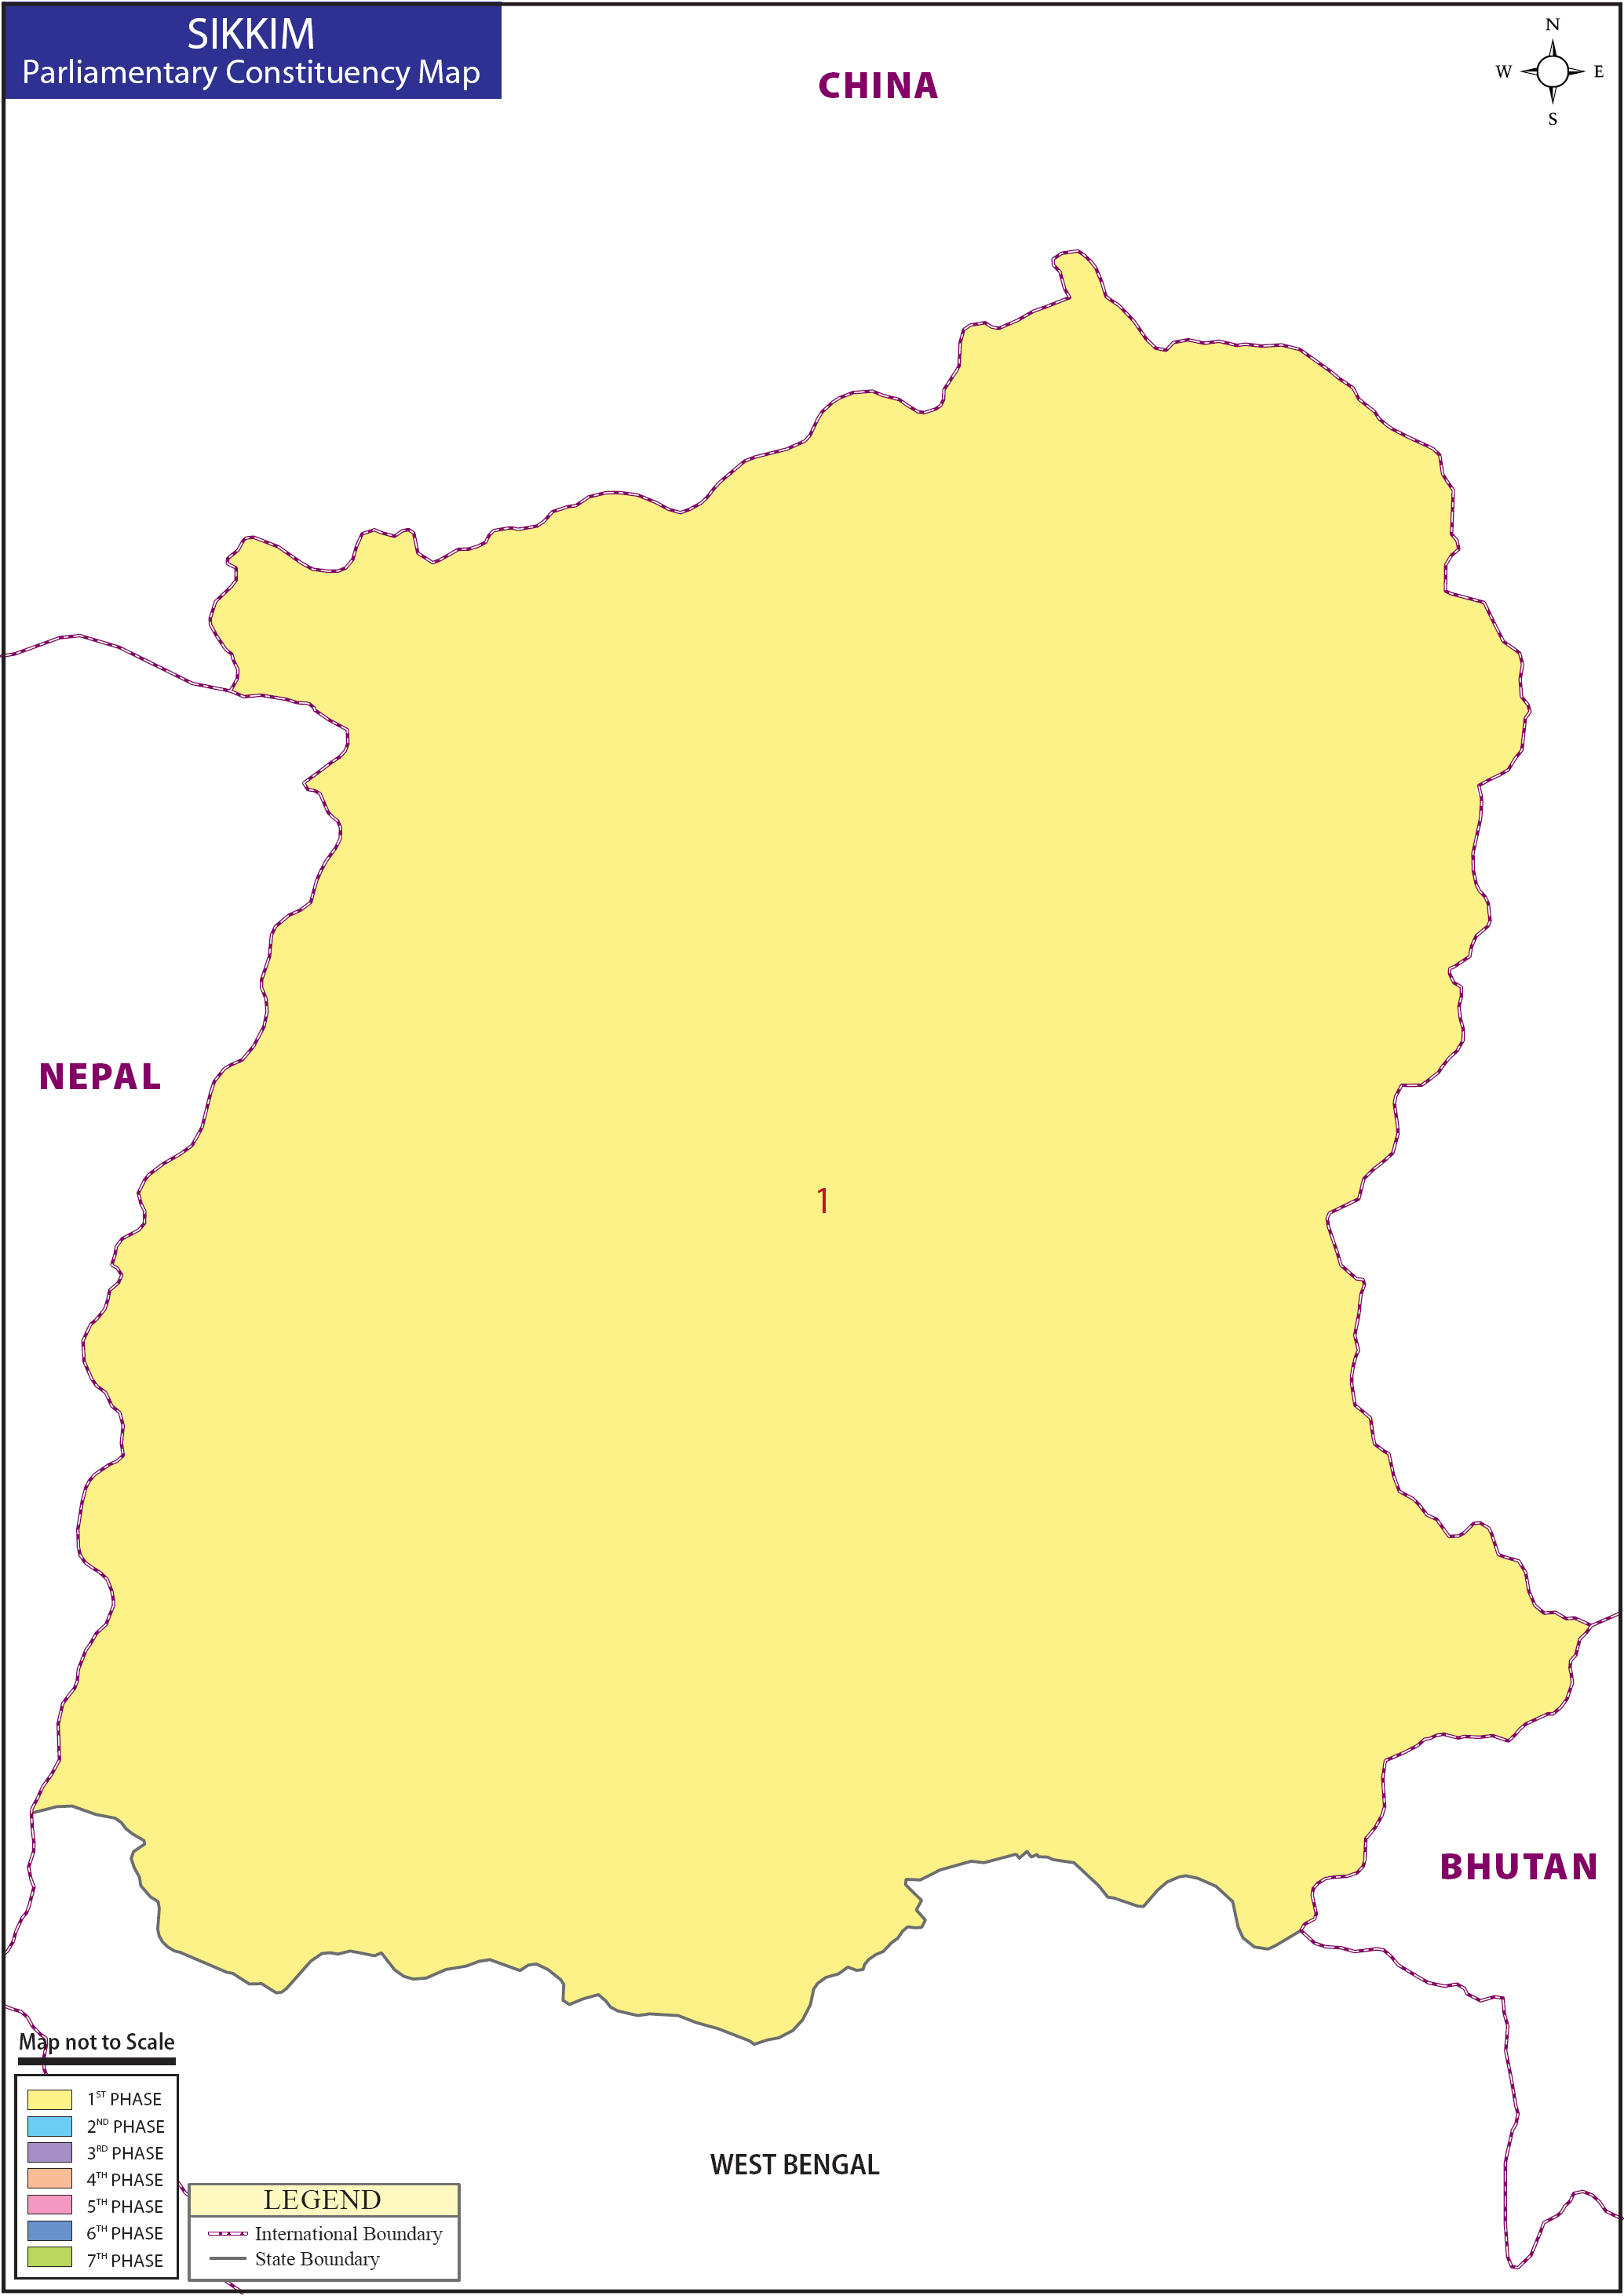 Sikkim Parliamentary Constituency Map